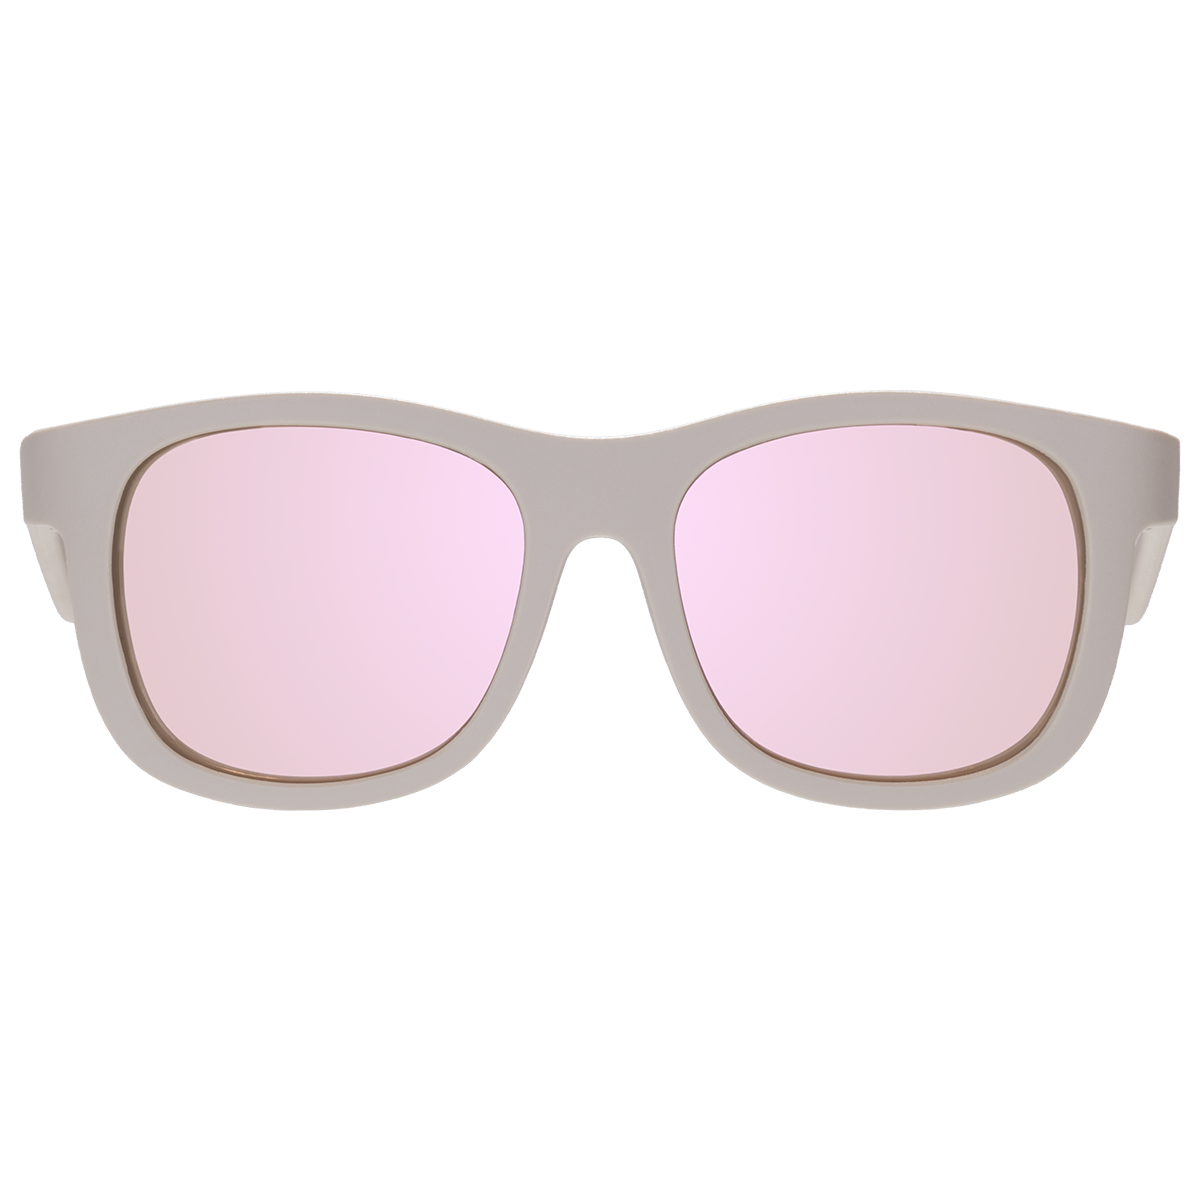 The Hipster- Polarized with Mirrored Lens Babiators Sunglasses